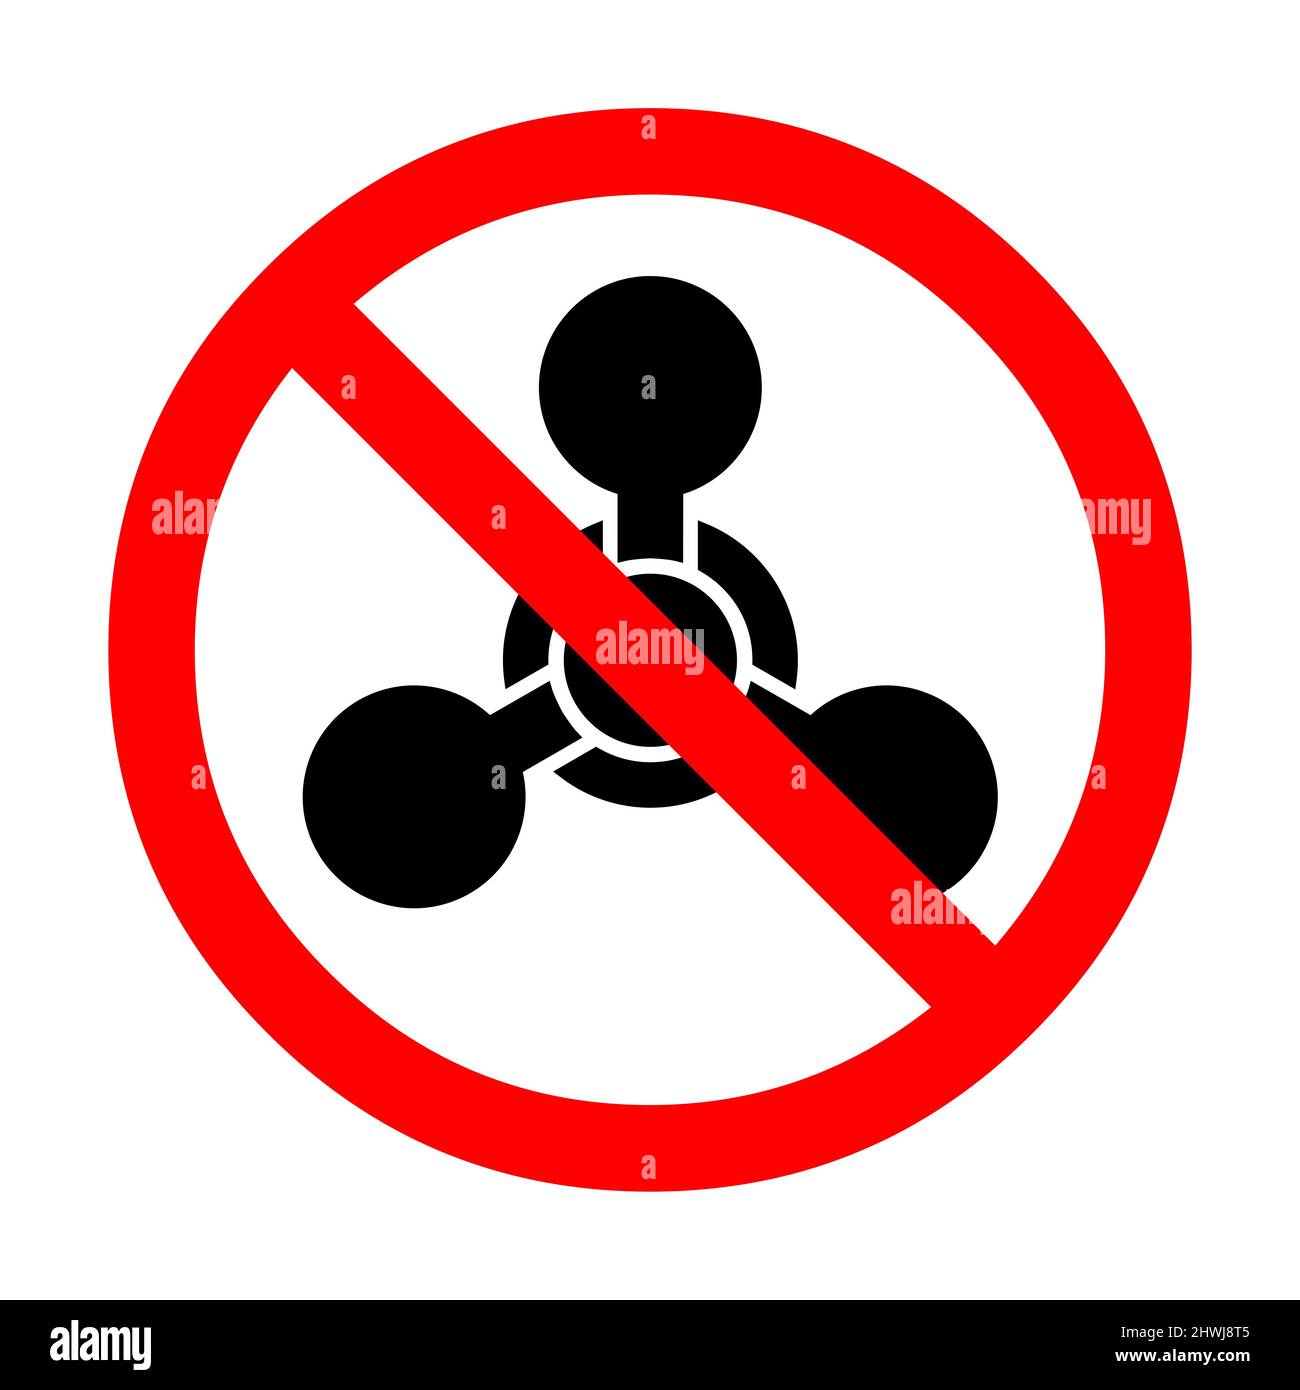 No chemical weapons symbol icon Stock Photo